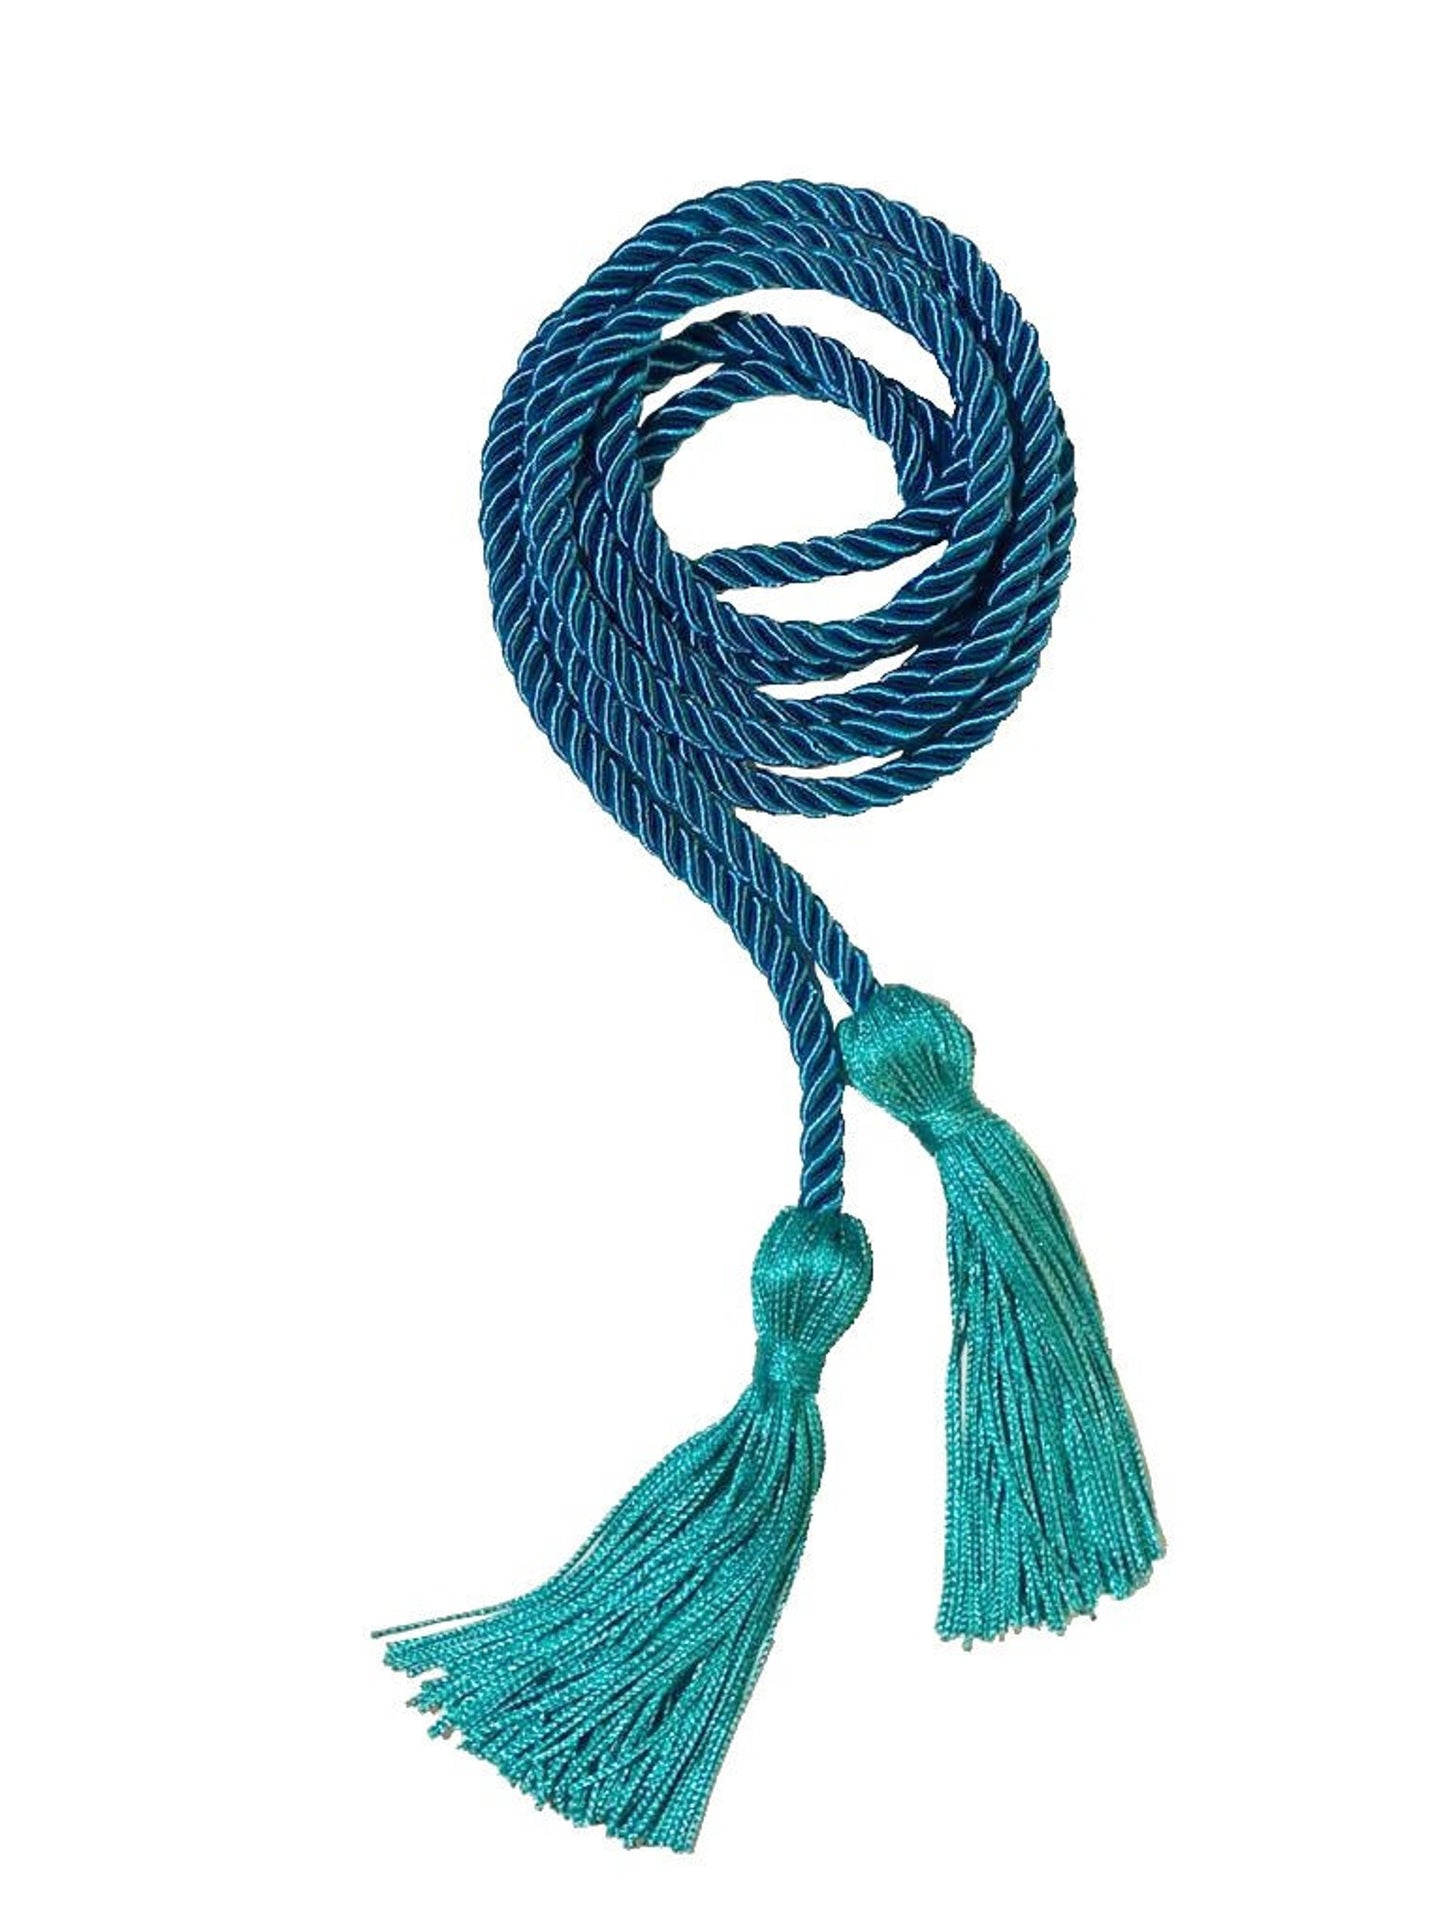 Teal Honor Cord